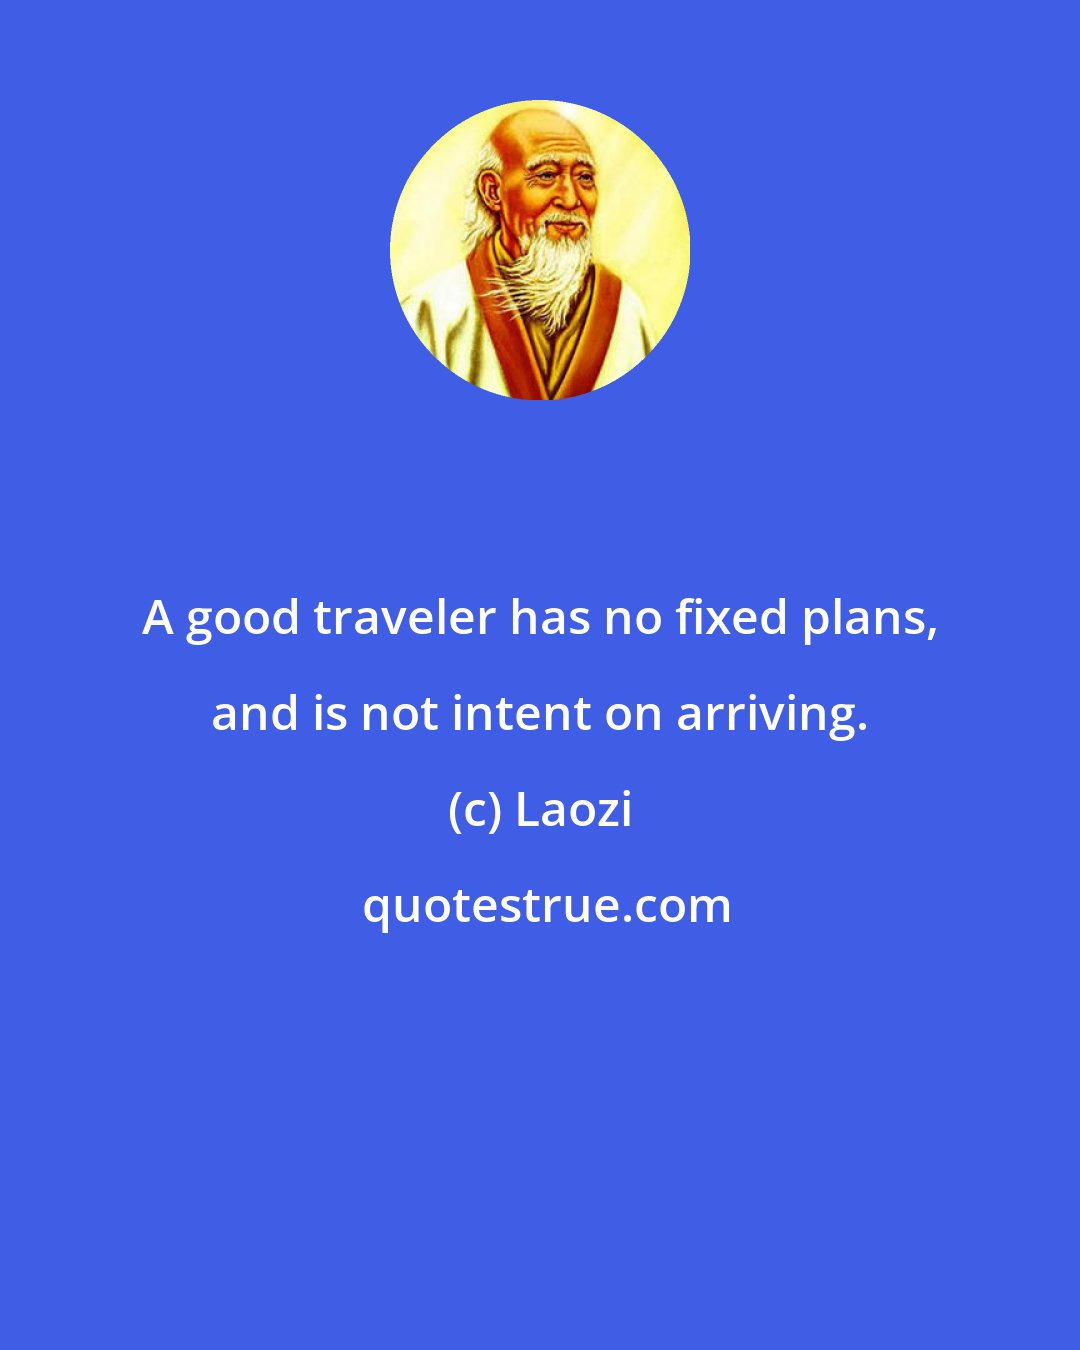 Laozi: A good traveler has no fixed plans, and is not intent on arriving.